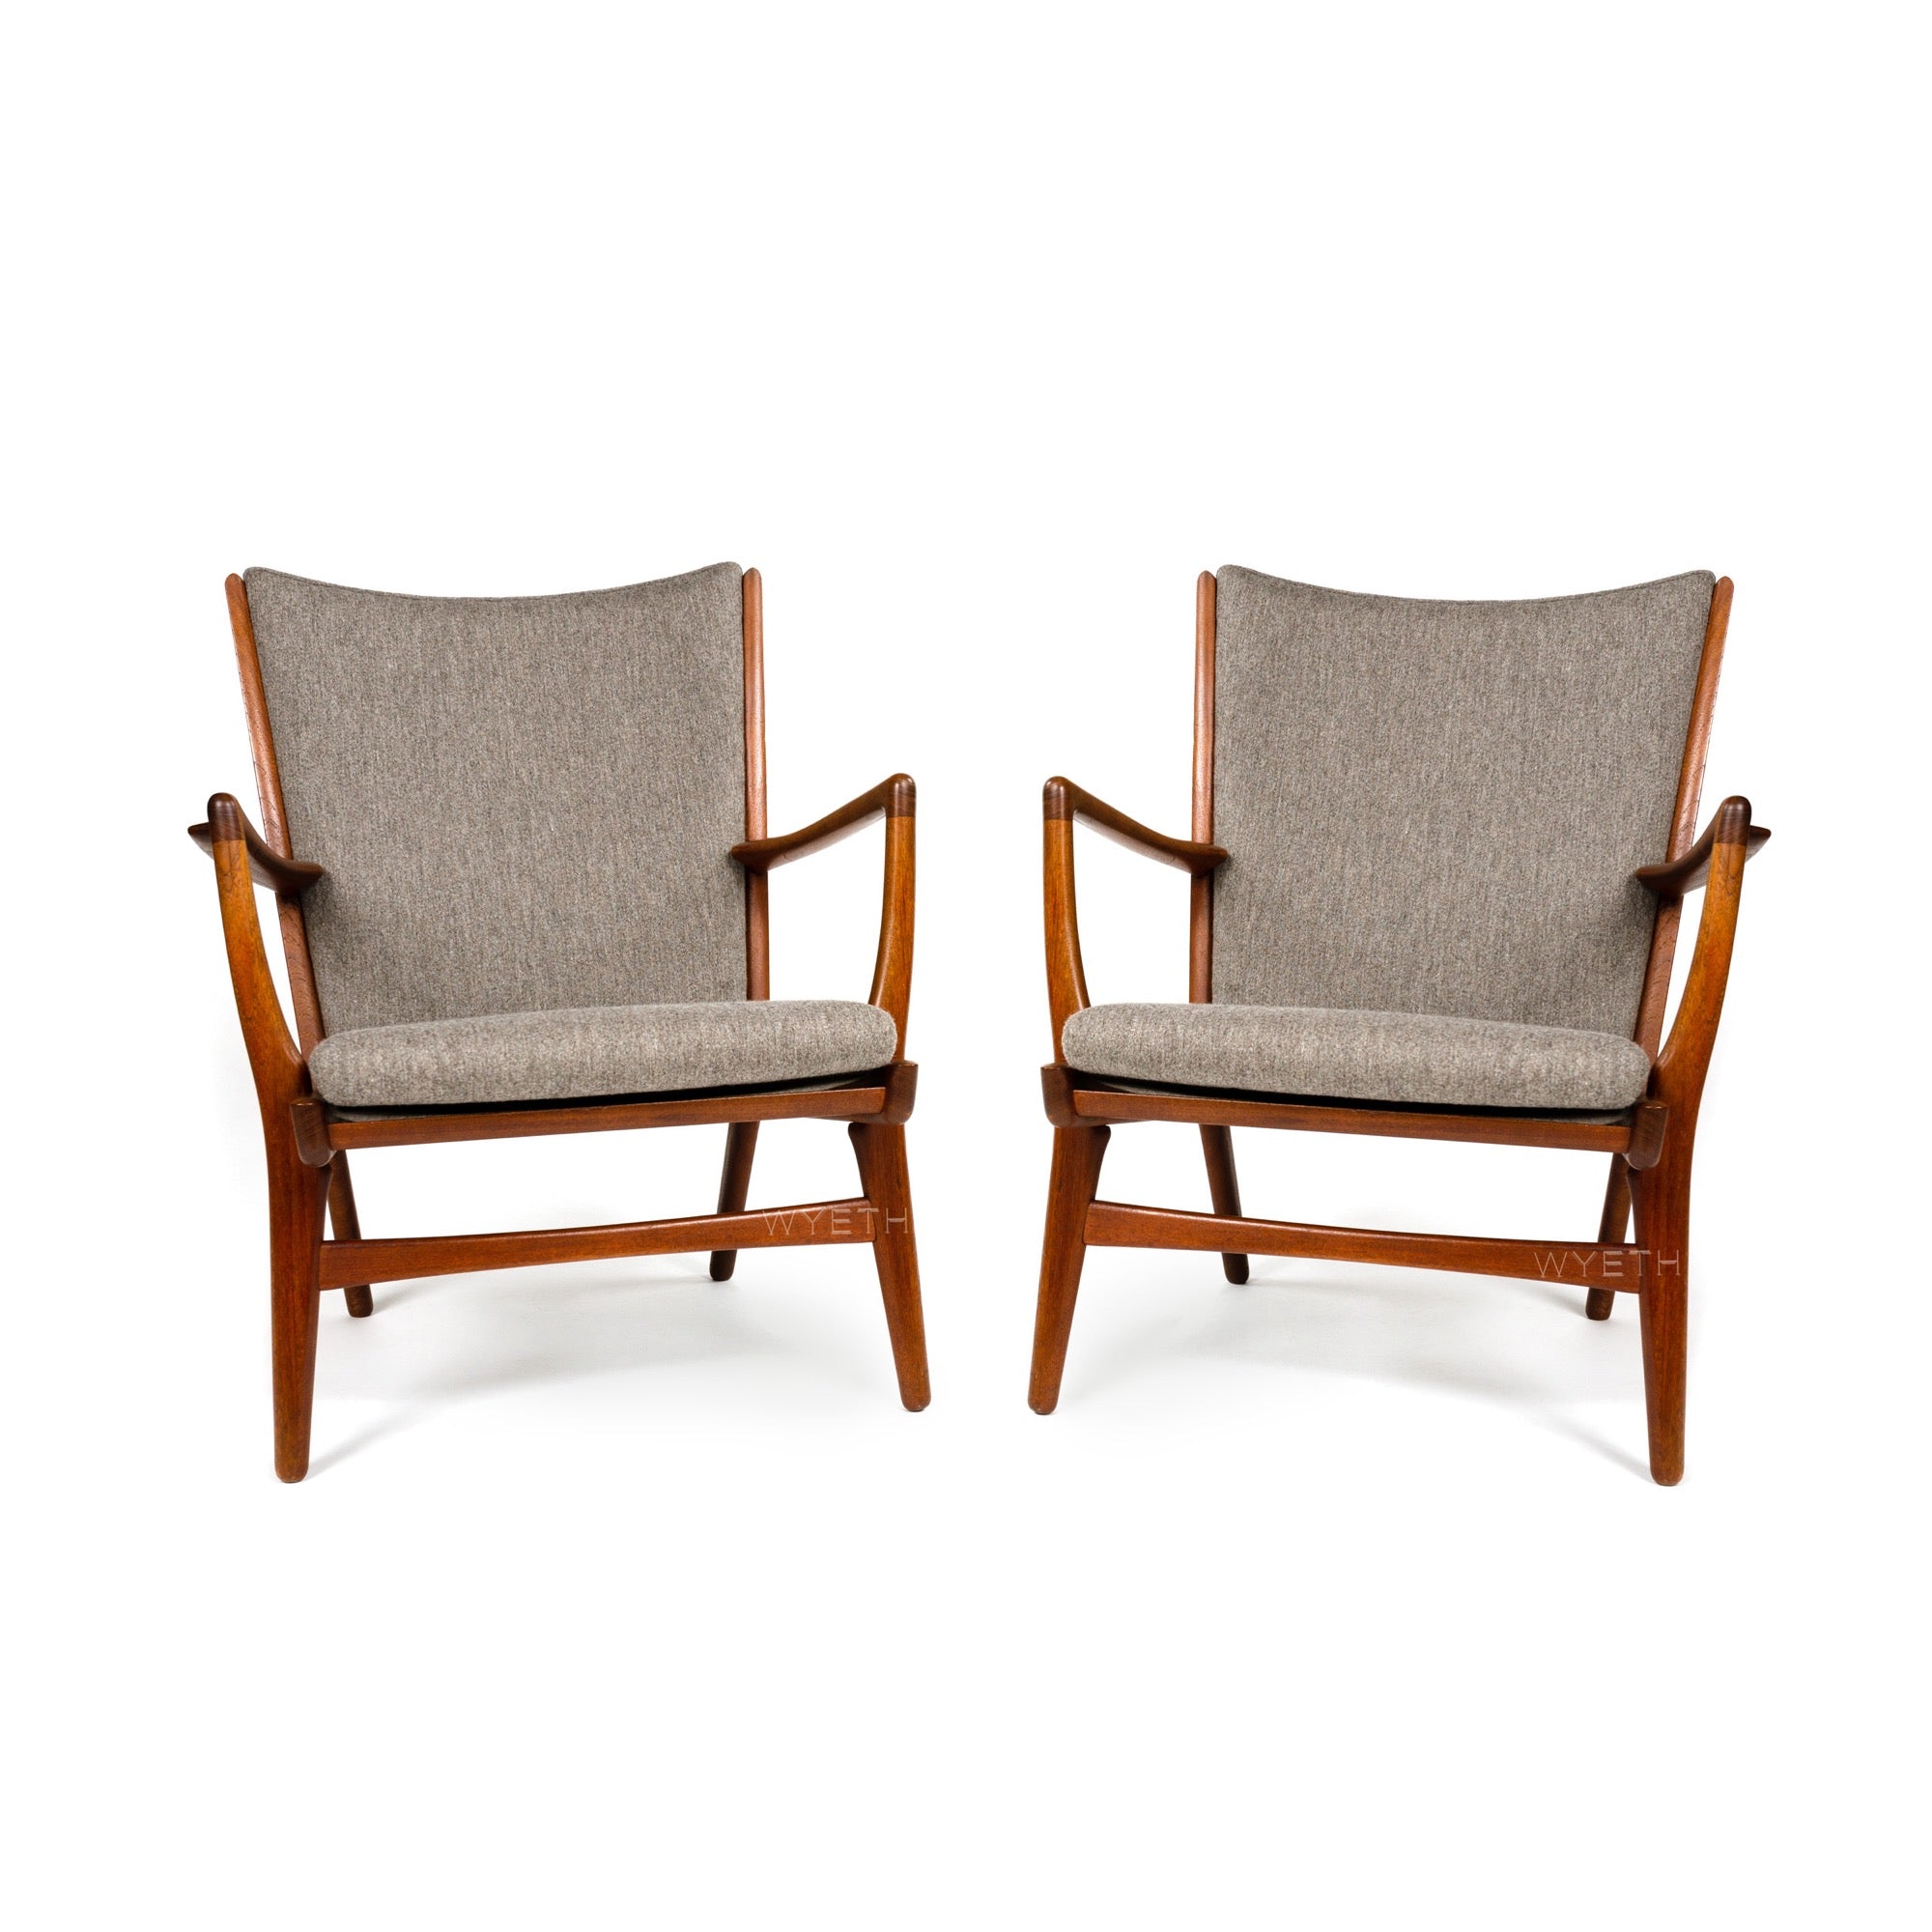 Pair of Lounge Chairs by Hans J. Wegner for A.P. Stolen